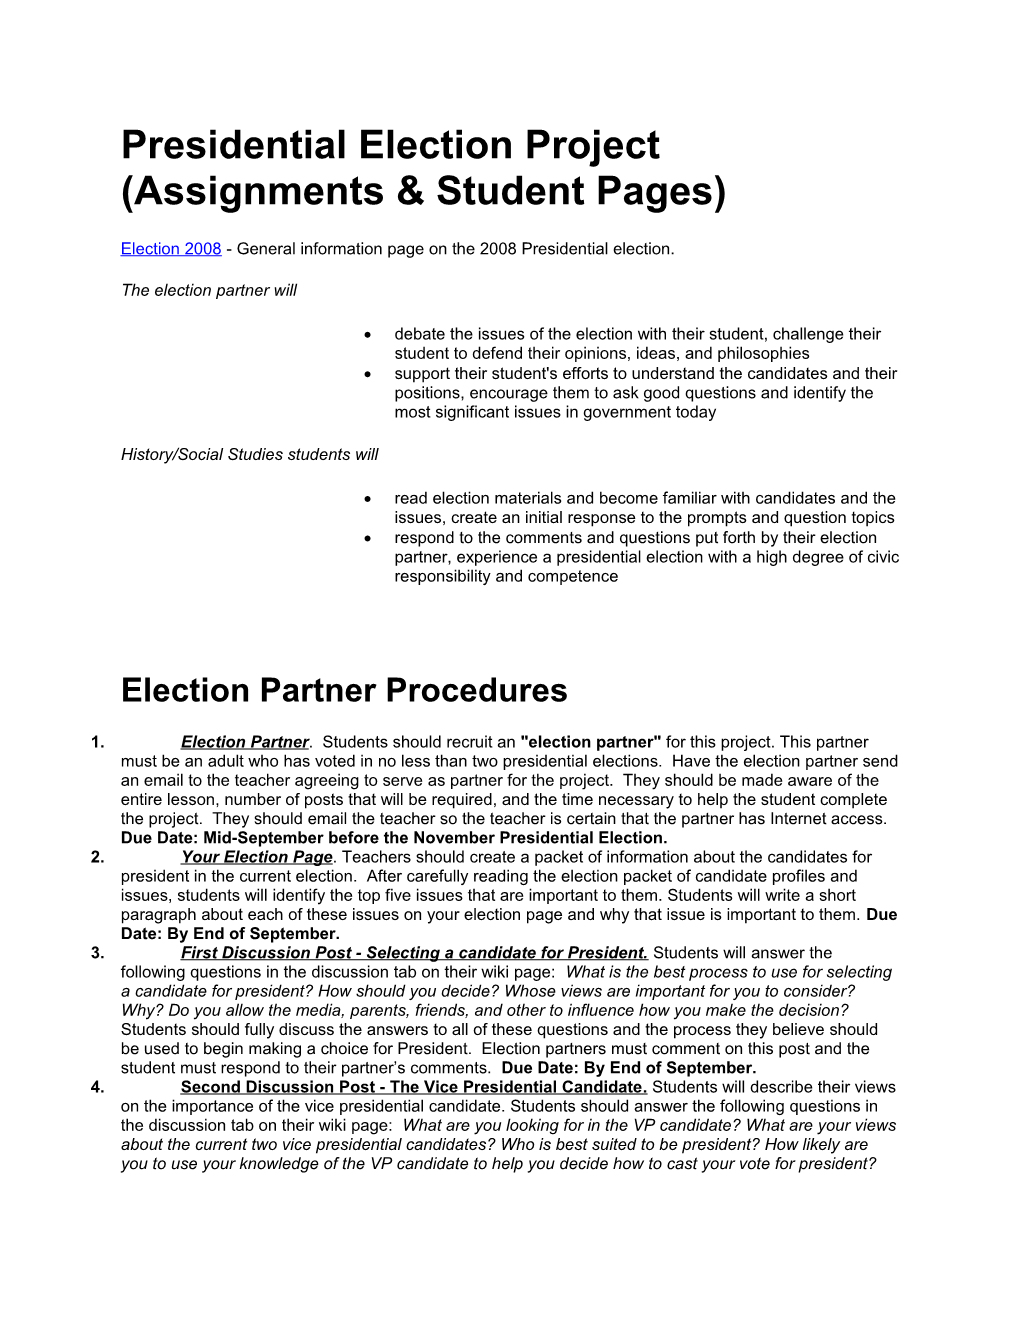 Presidential Election Project (Assignments Student Pages)